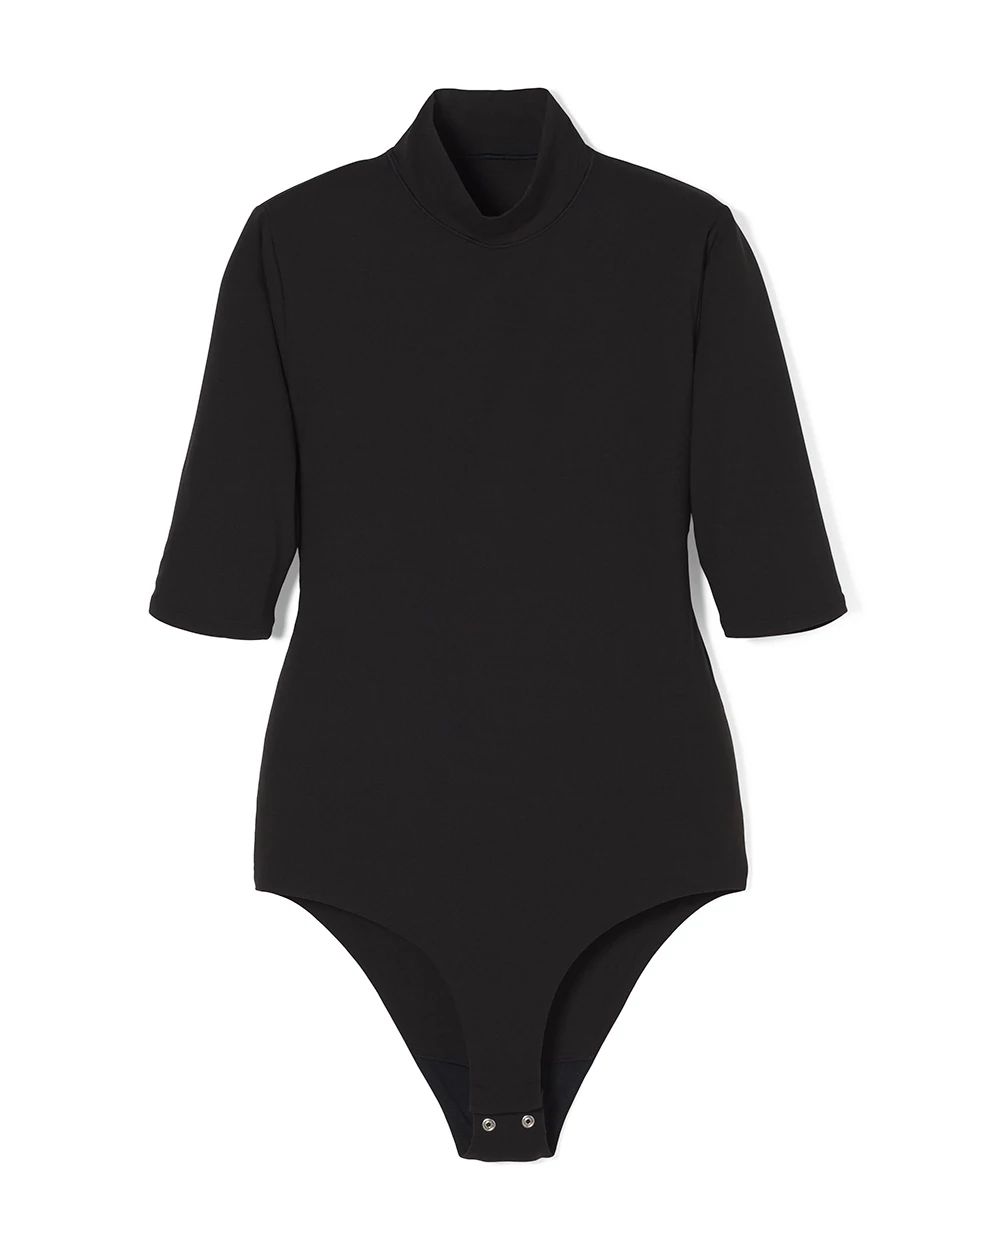 WHBM® FORME Elbow-Sleeve Bodysuit click to view larger image.